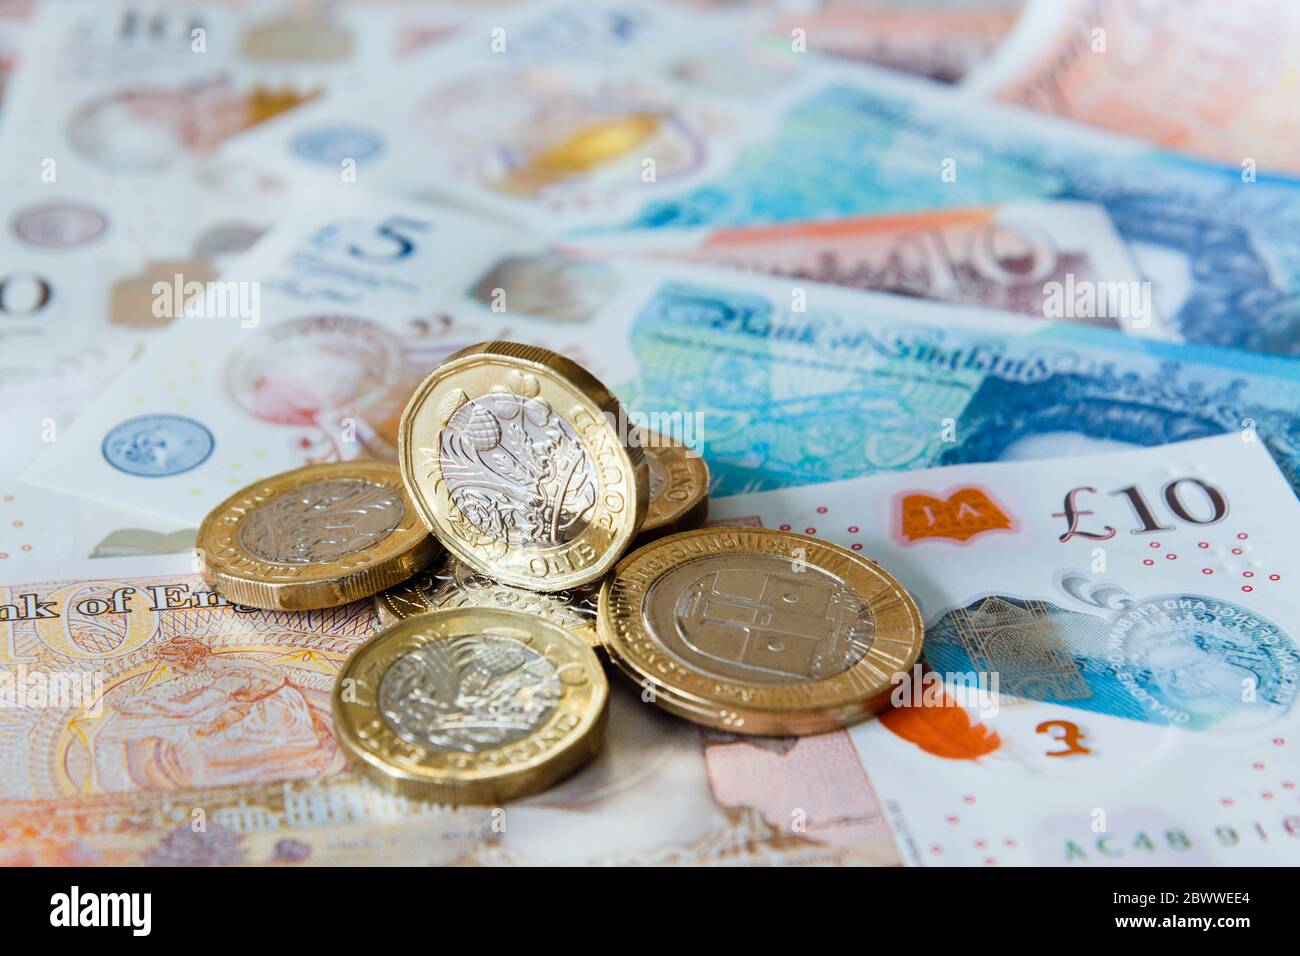 A pile of one pound £ coins British money sterling on new polymer £10 and £5 notes GBP close-up. England UK Britain Stock Photo